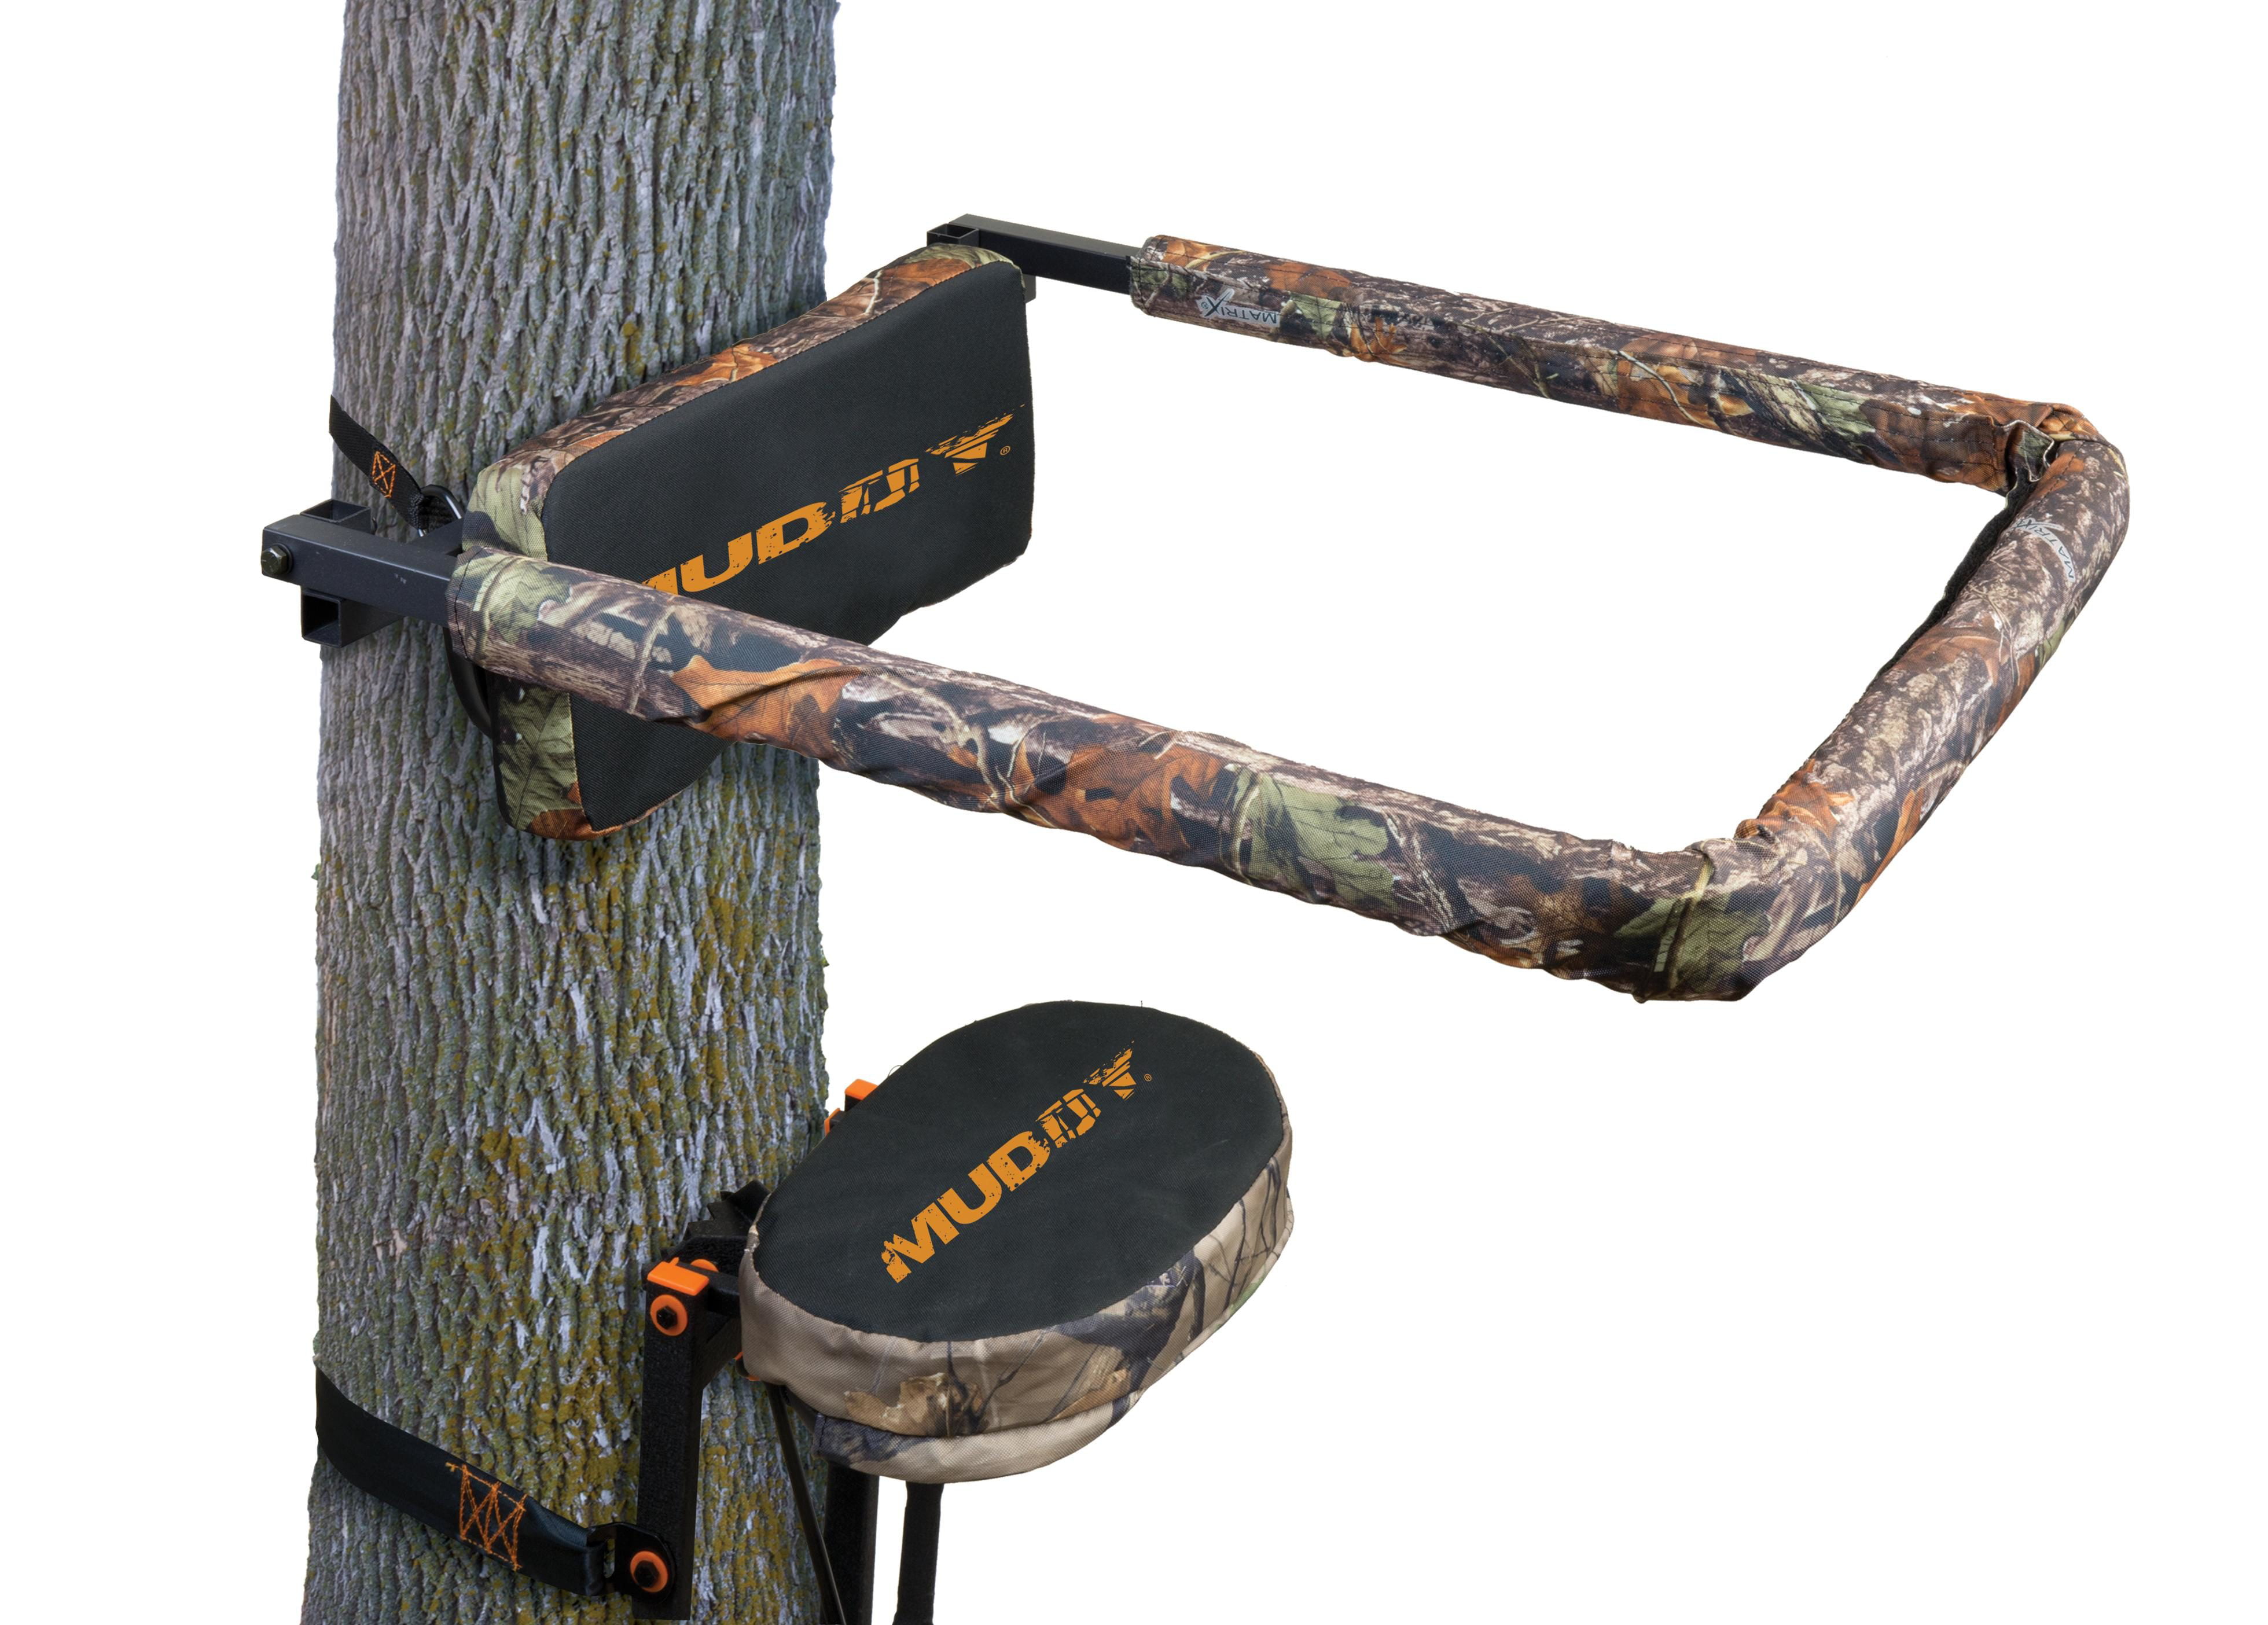 Muddy Outdoors Magnum Pro Padded Adjustable Treestand Harness System Black 